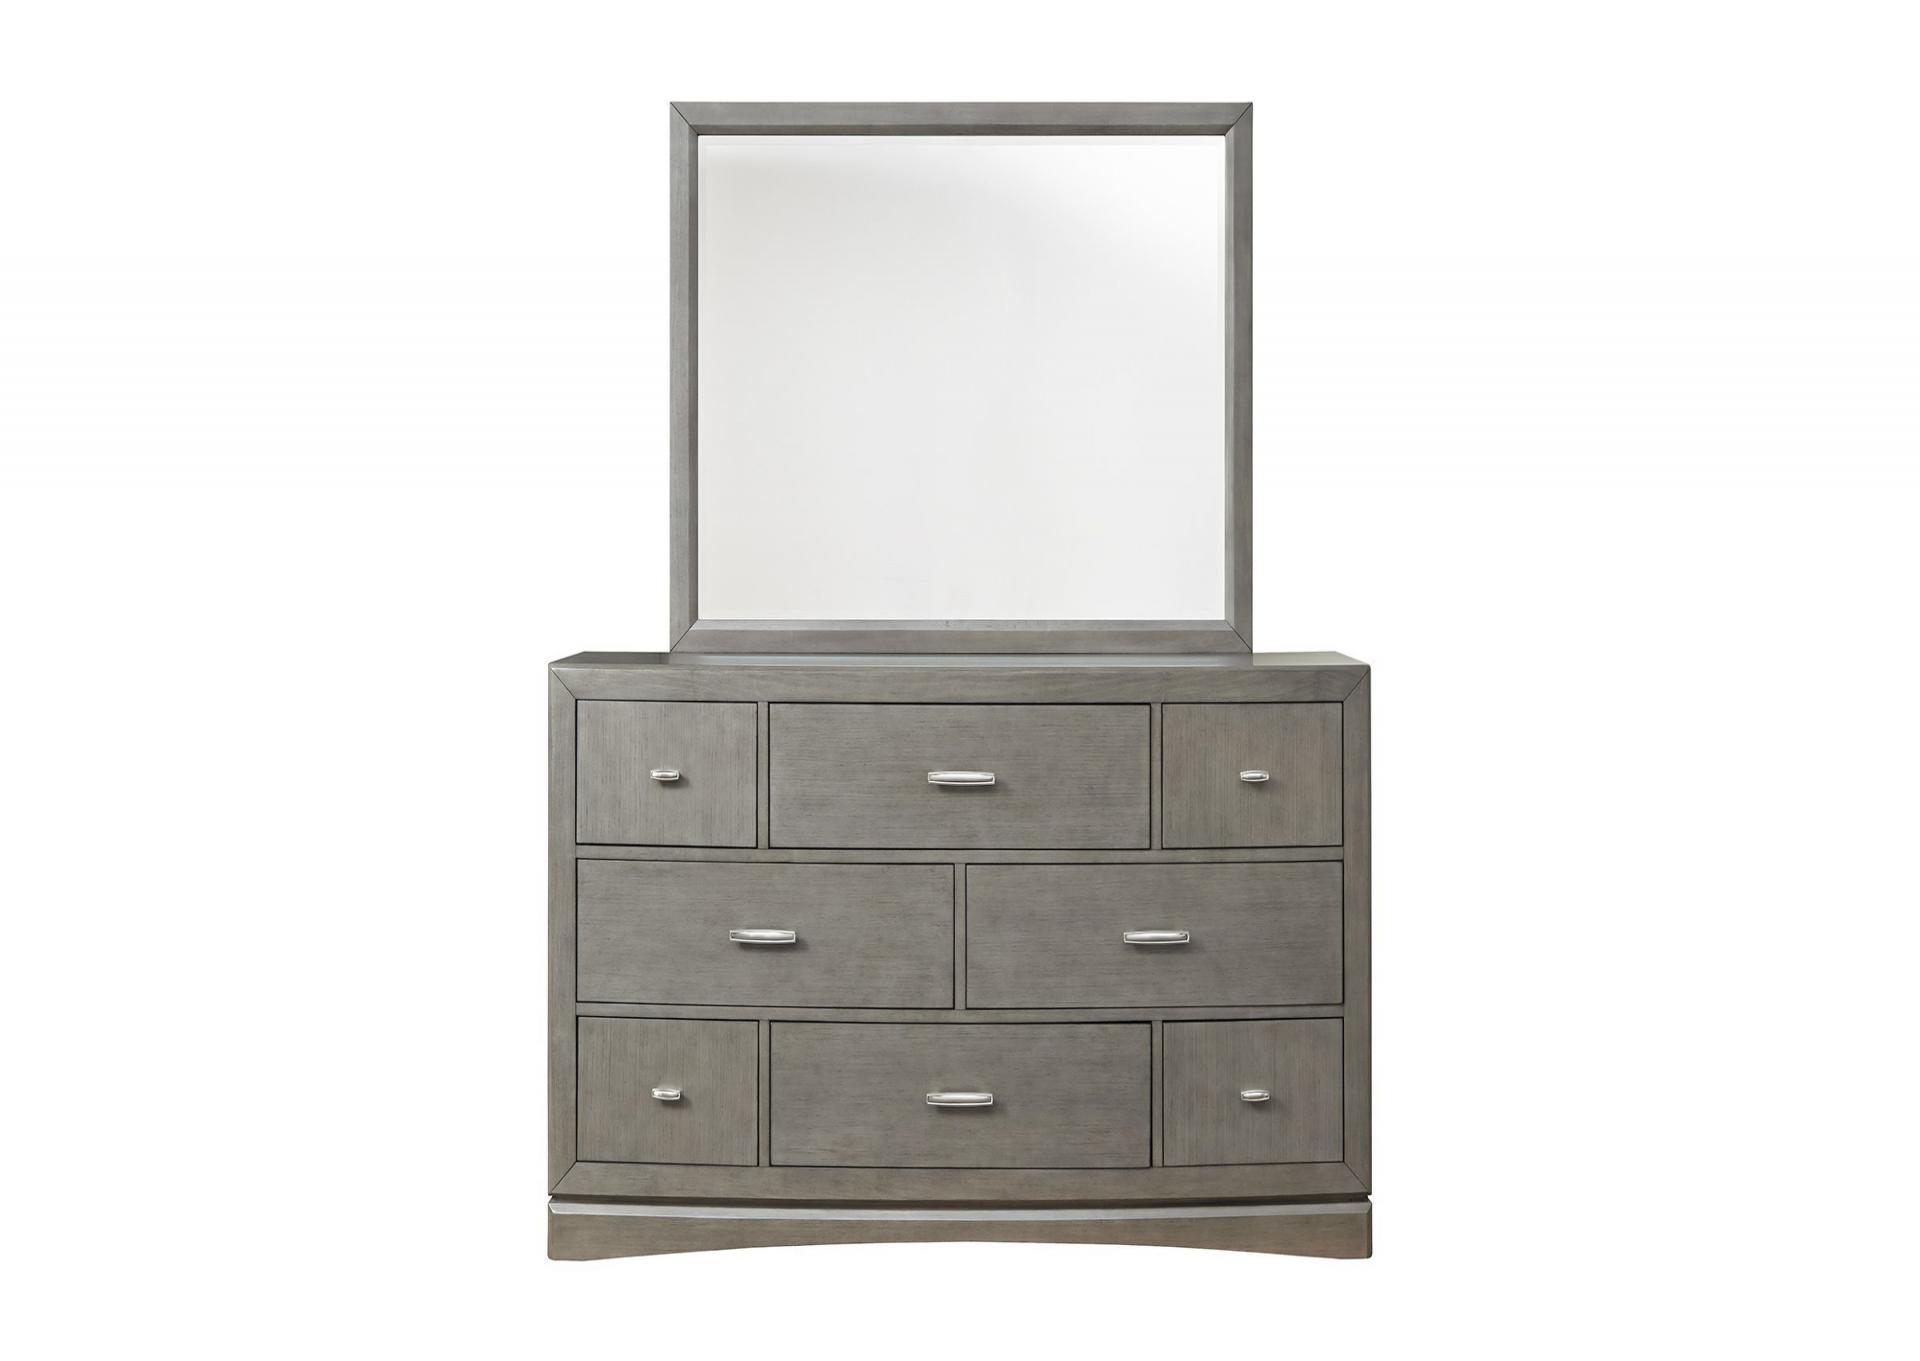 Toro Gray Bedroom Group with Dresser Mirror and Nighstand.  STorage in Side rails